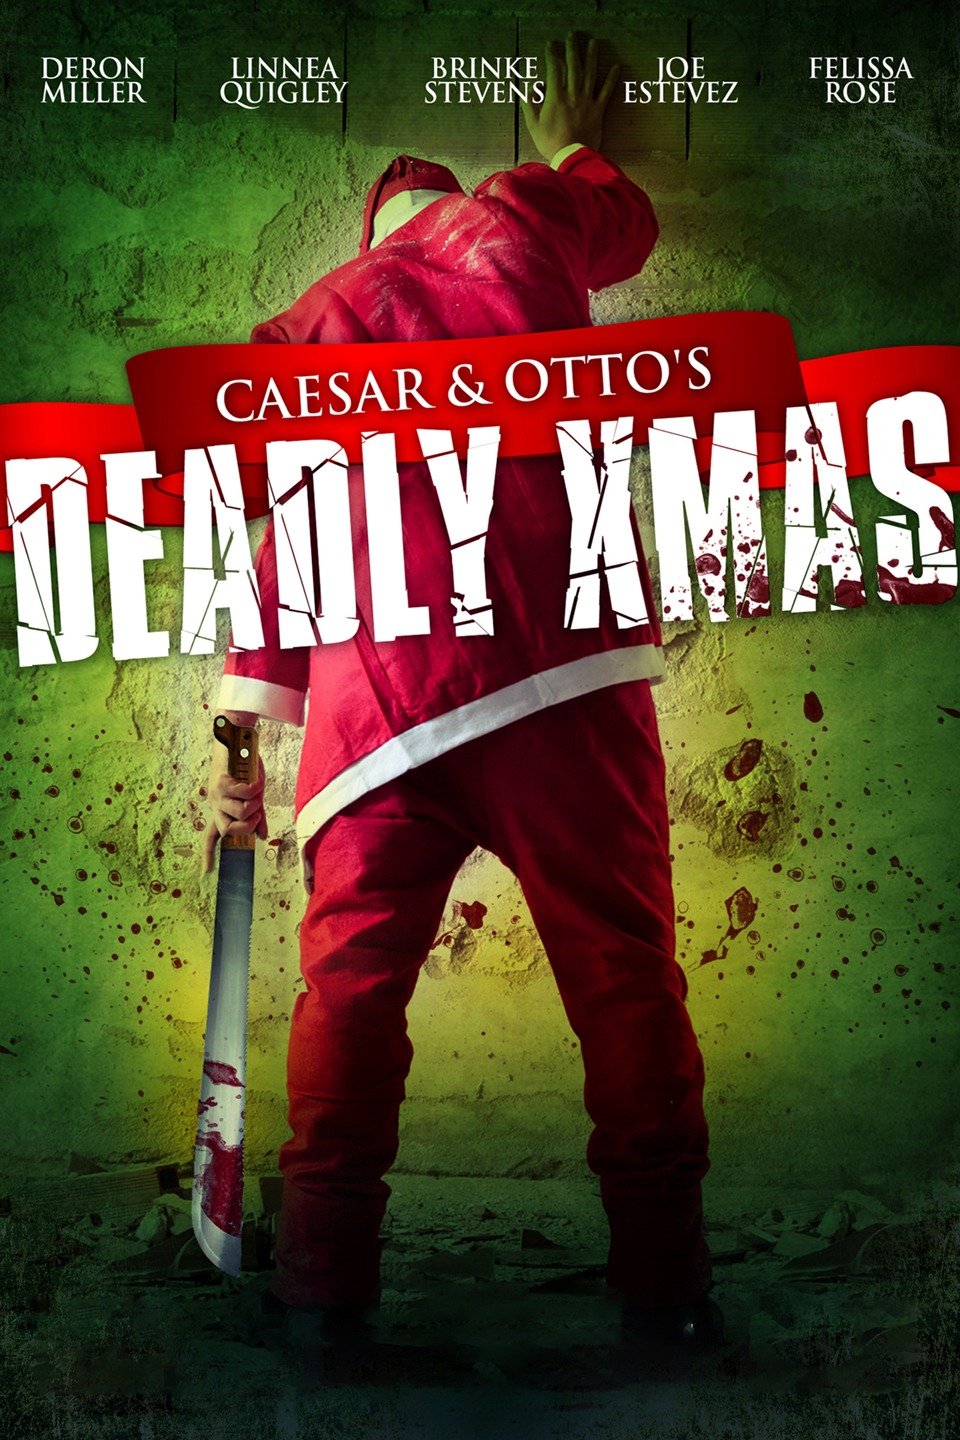 Caesar and otto's deadly xmas